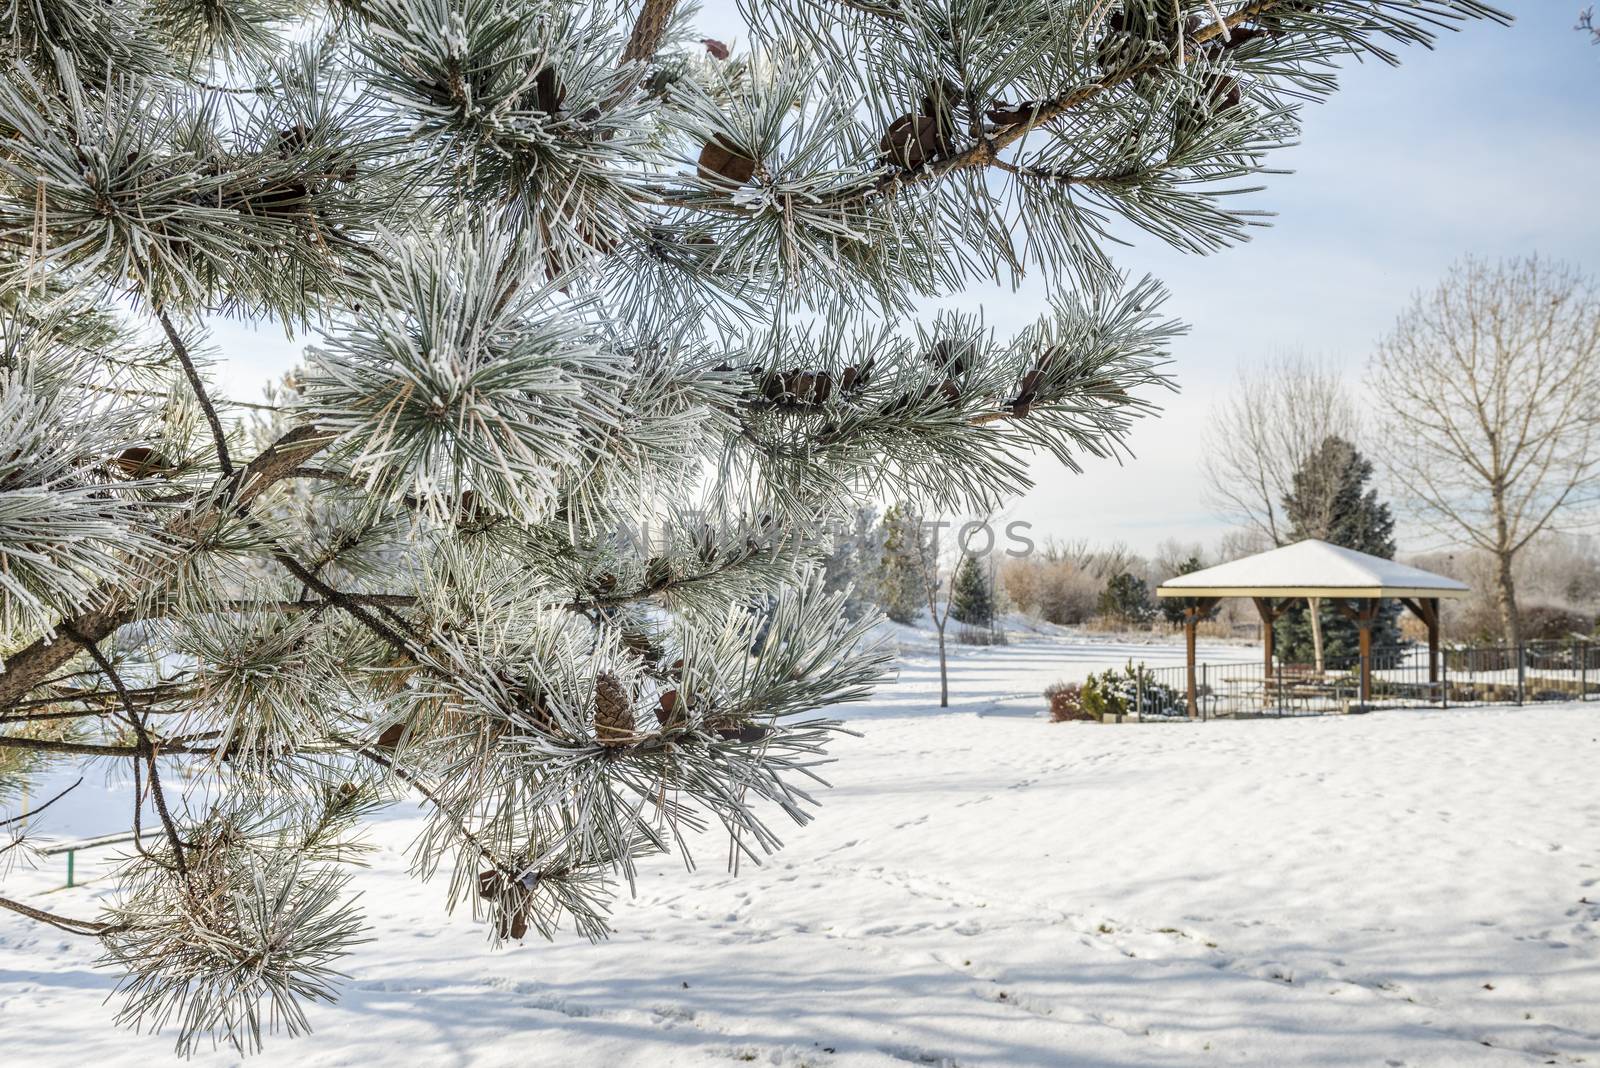 Frost-covered pine tree in a park with a gazebo in winter